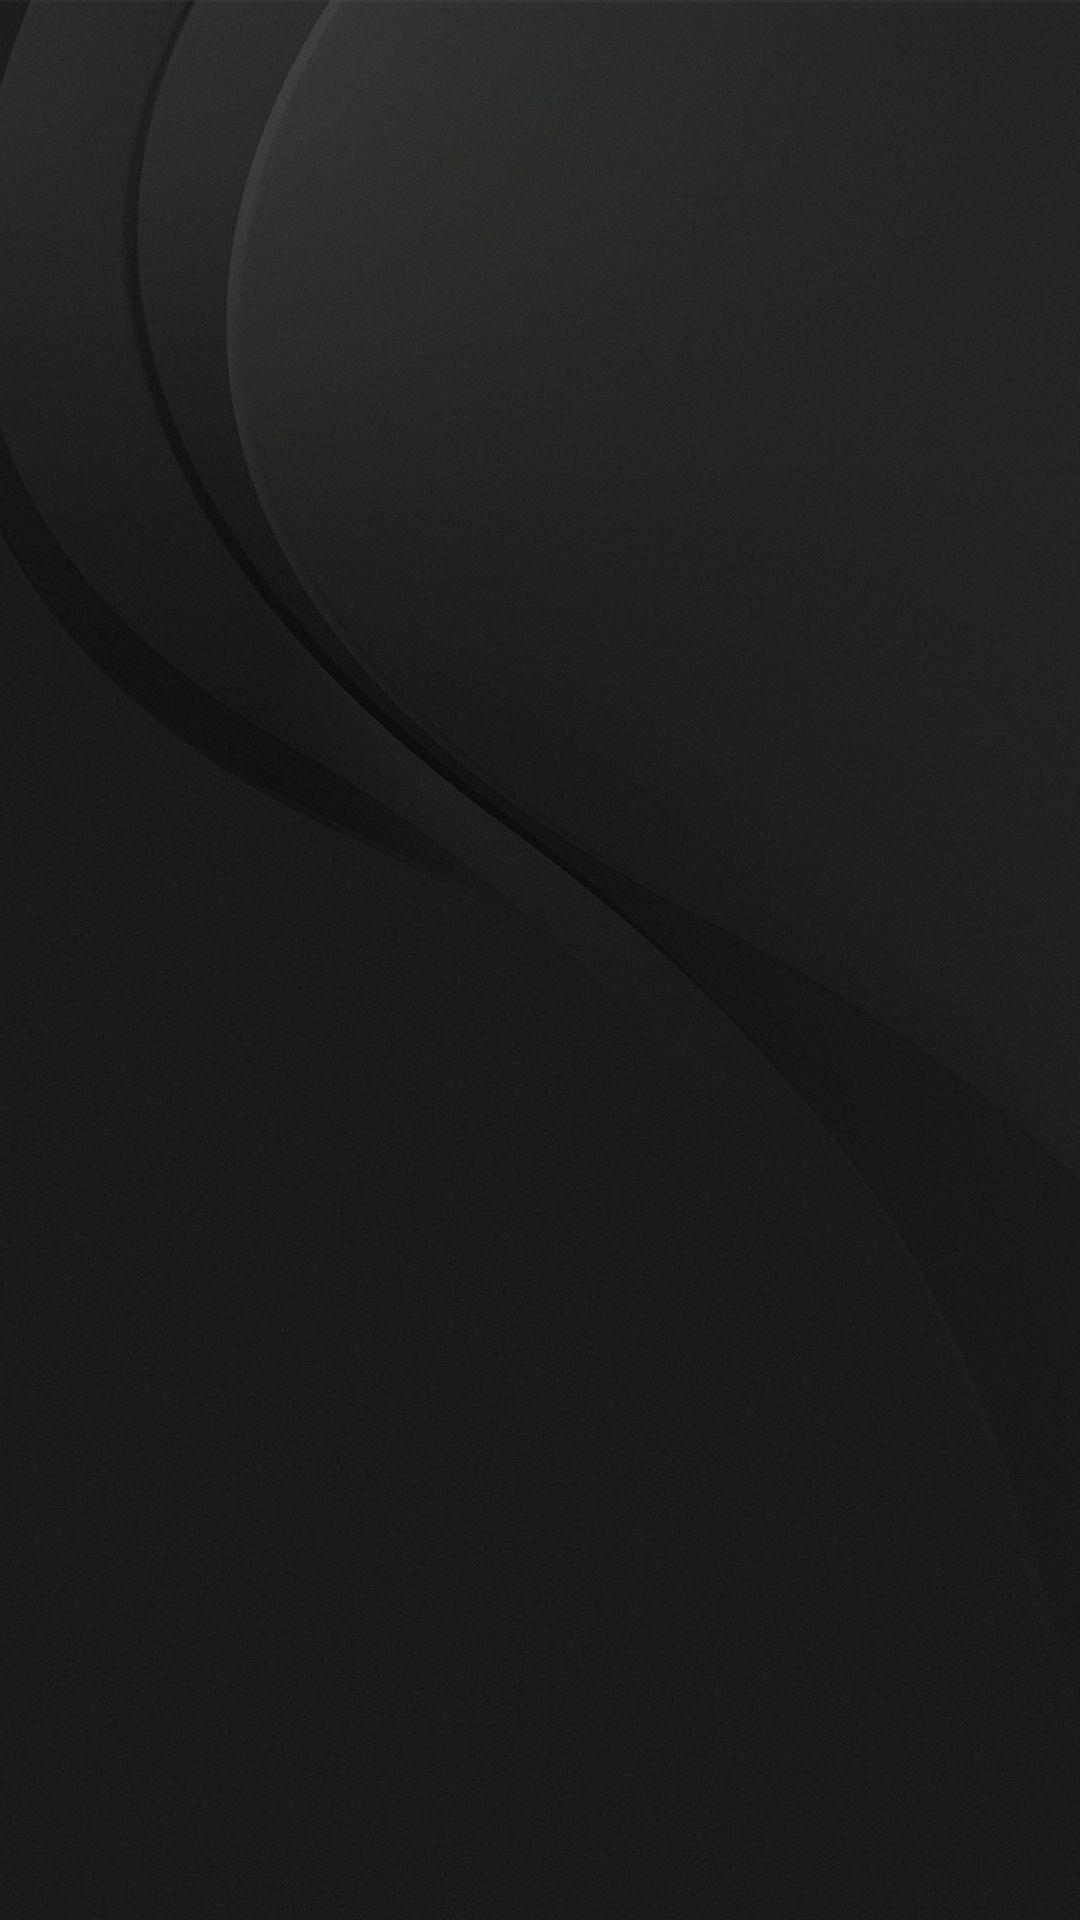 Black Wallpaper Hd 1080P For Mobile - We hope you enjoy our growing